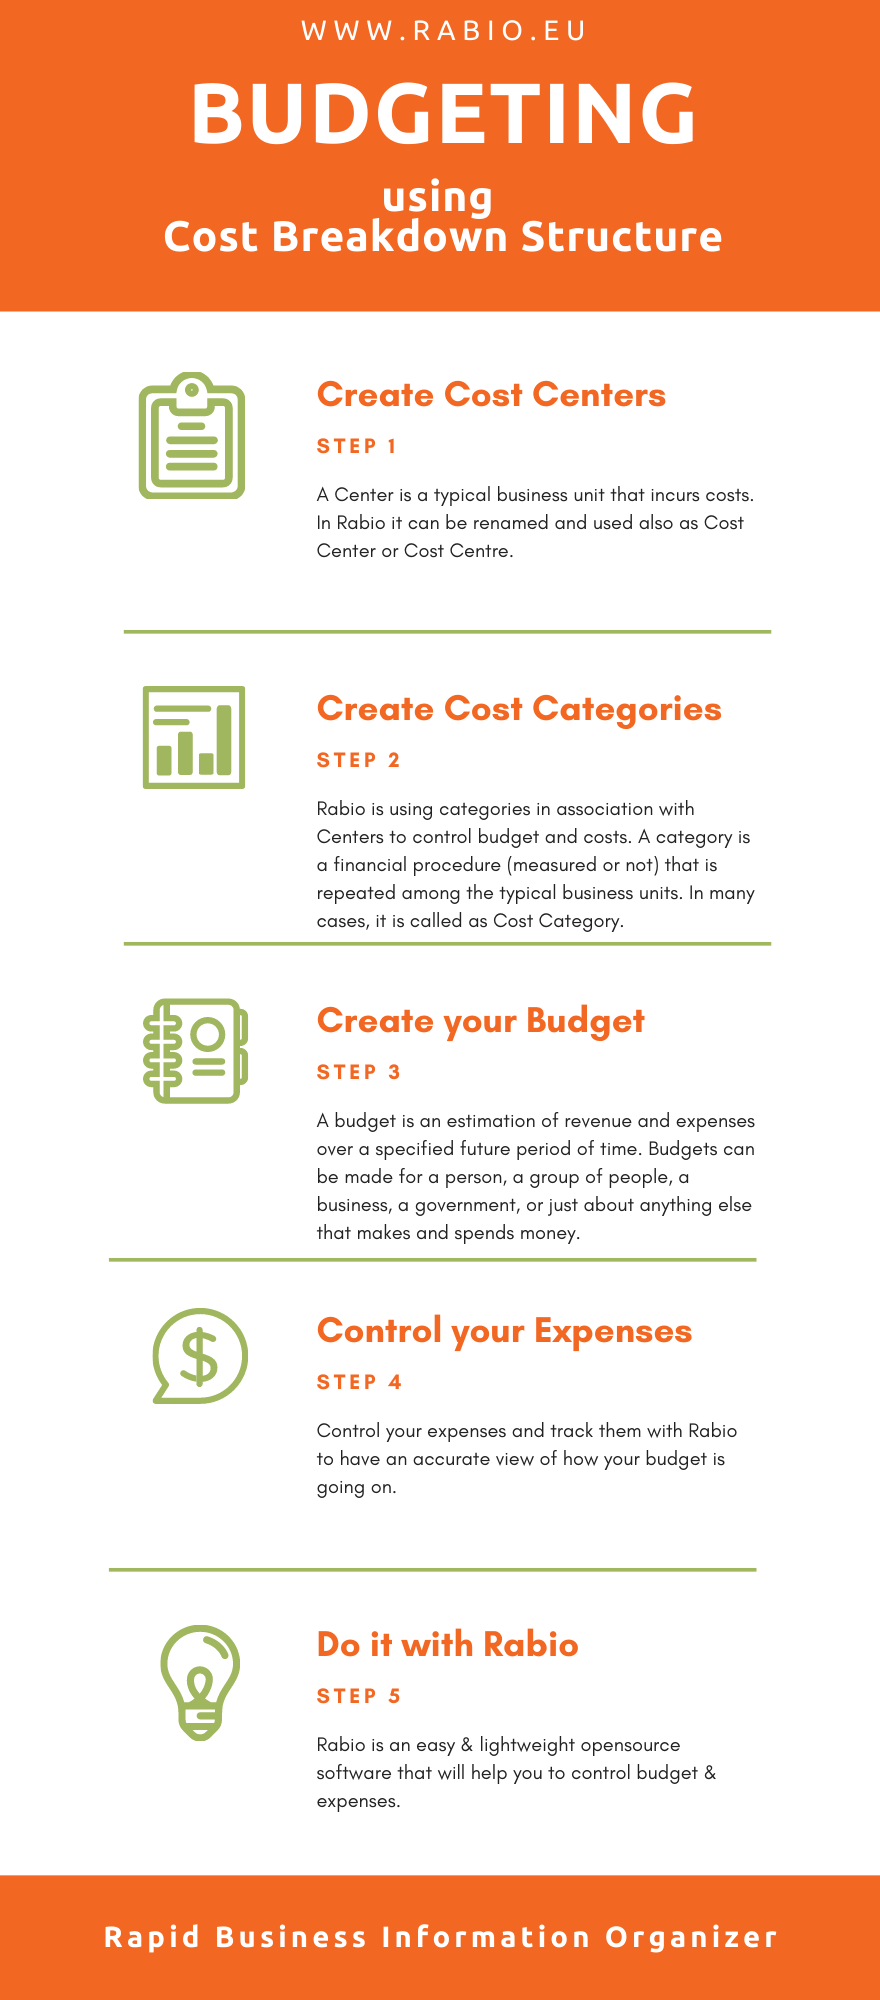 Budgeting using Cost Breakdown Structure